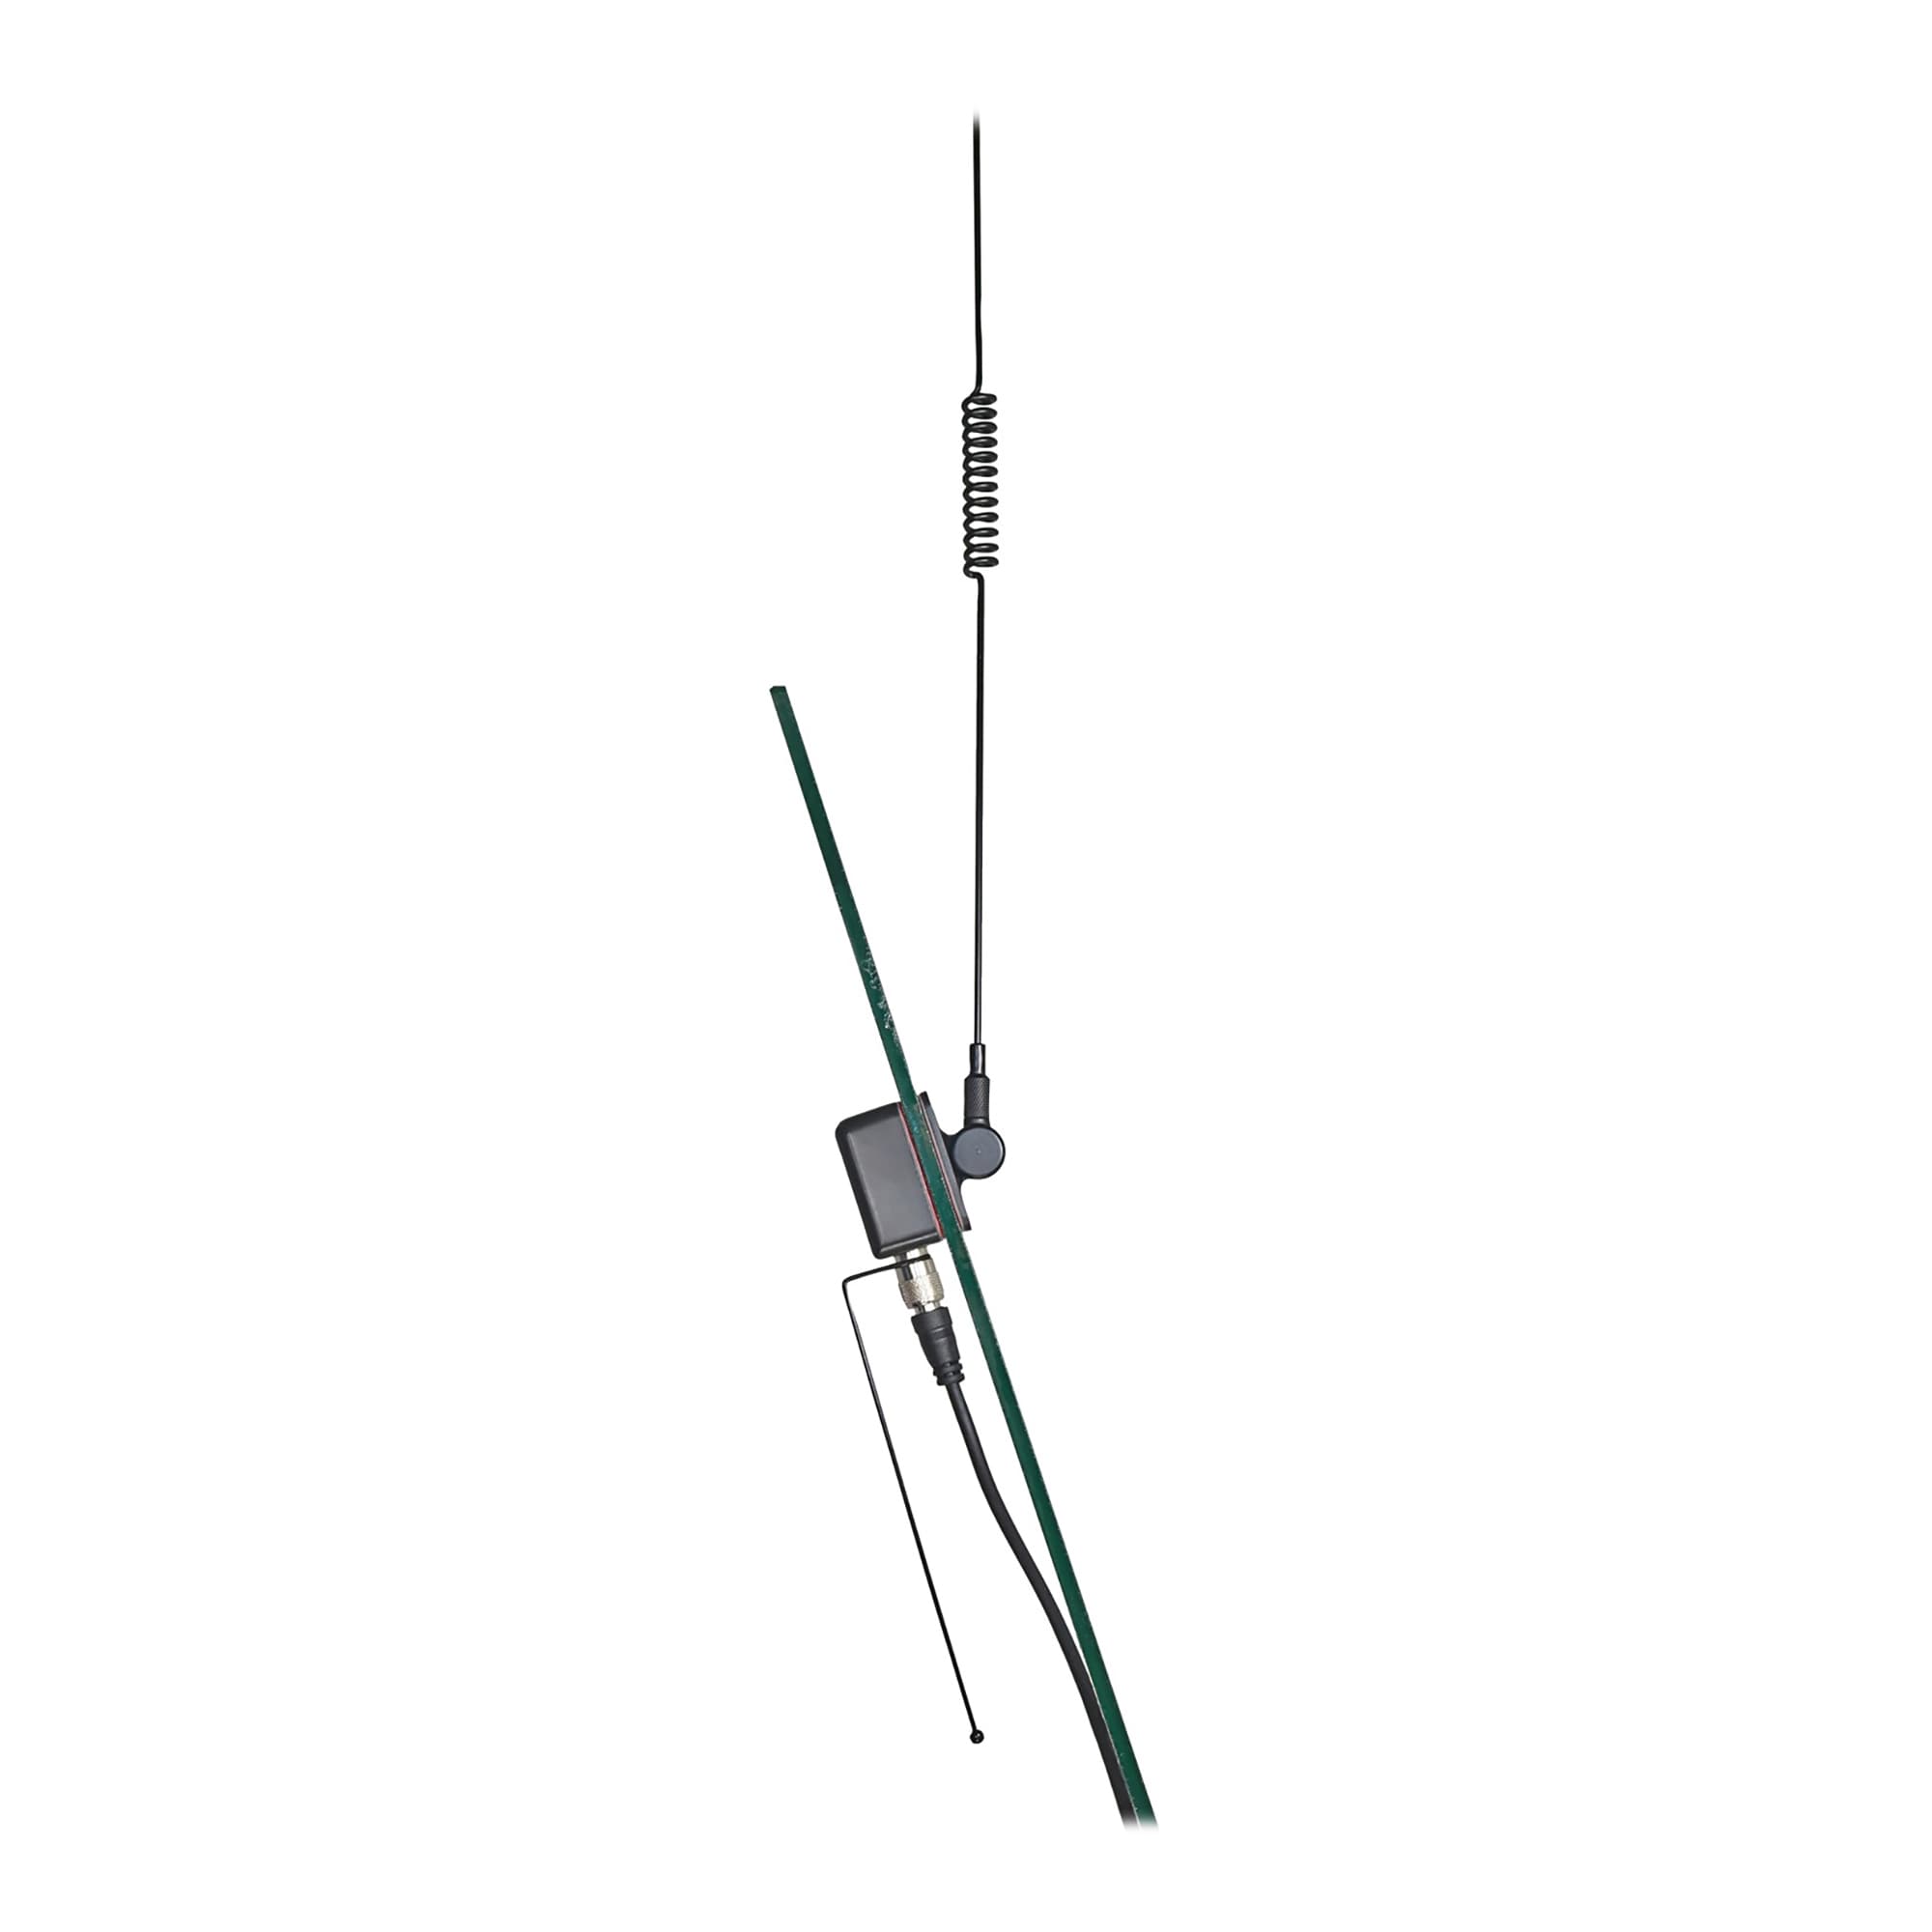 Tram 50-Watt Pretuned Dual-Band 144 MHz to 148 MHz VHF/440 MHz to 450 MHz UHF Amateur Radio Antenna Kit with Glass Mount and Cable Stainless Steel -  WSP1191